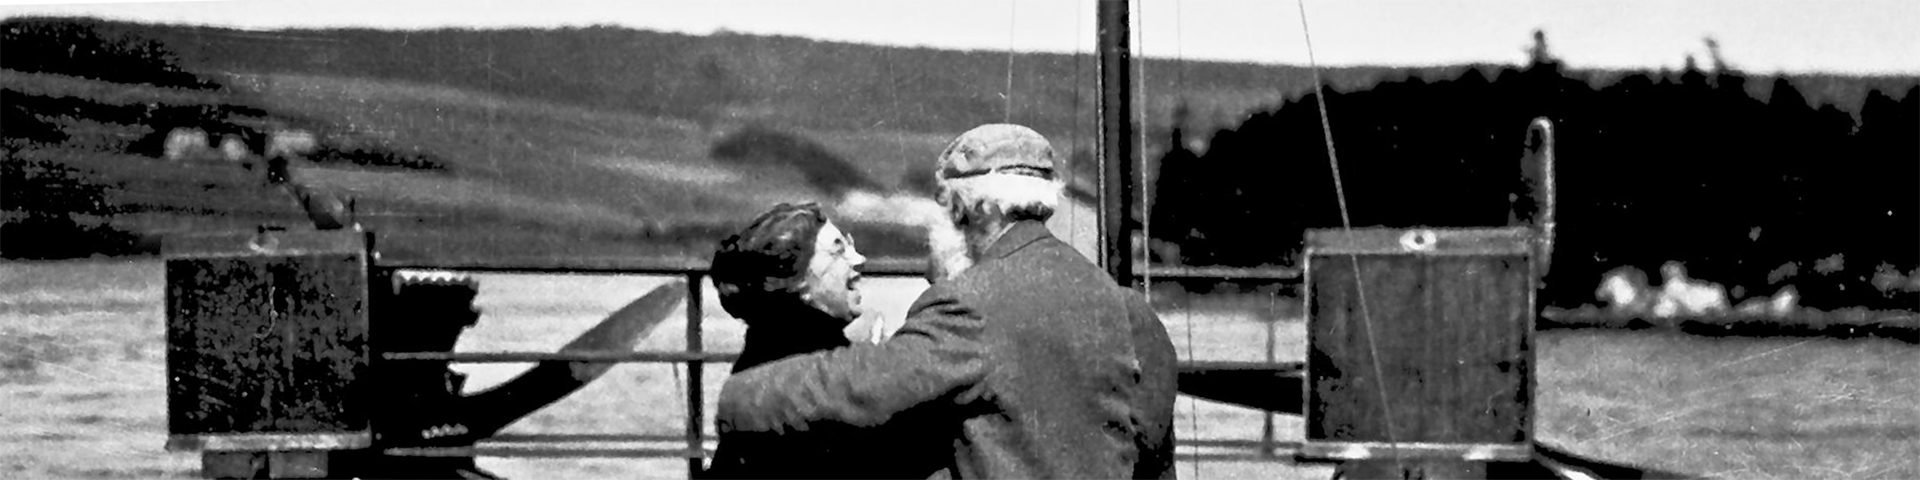 An historical photo of Mabel smiling up at Alexander Graham Bell while standing on a dock, they both have their backs towards the camera. 